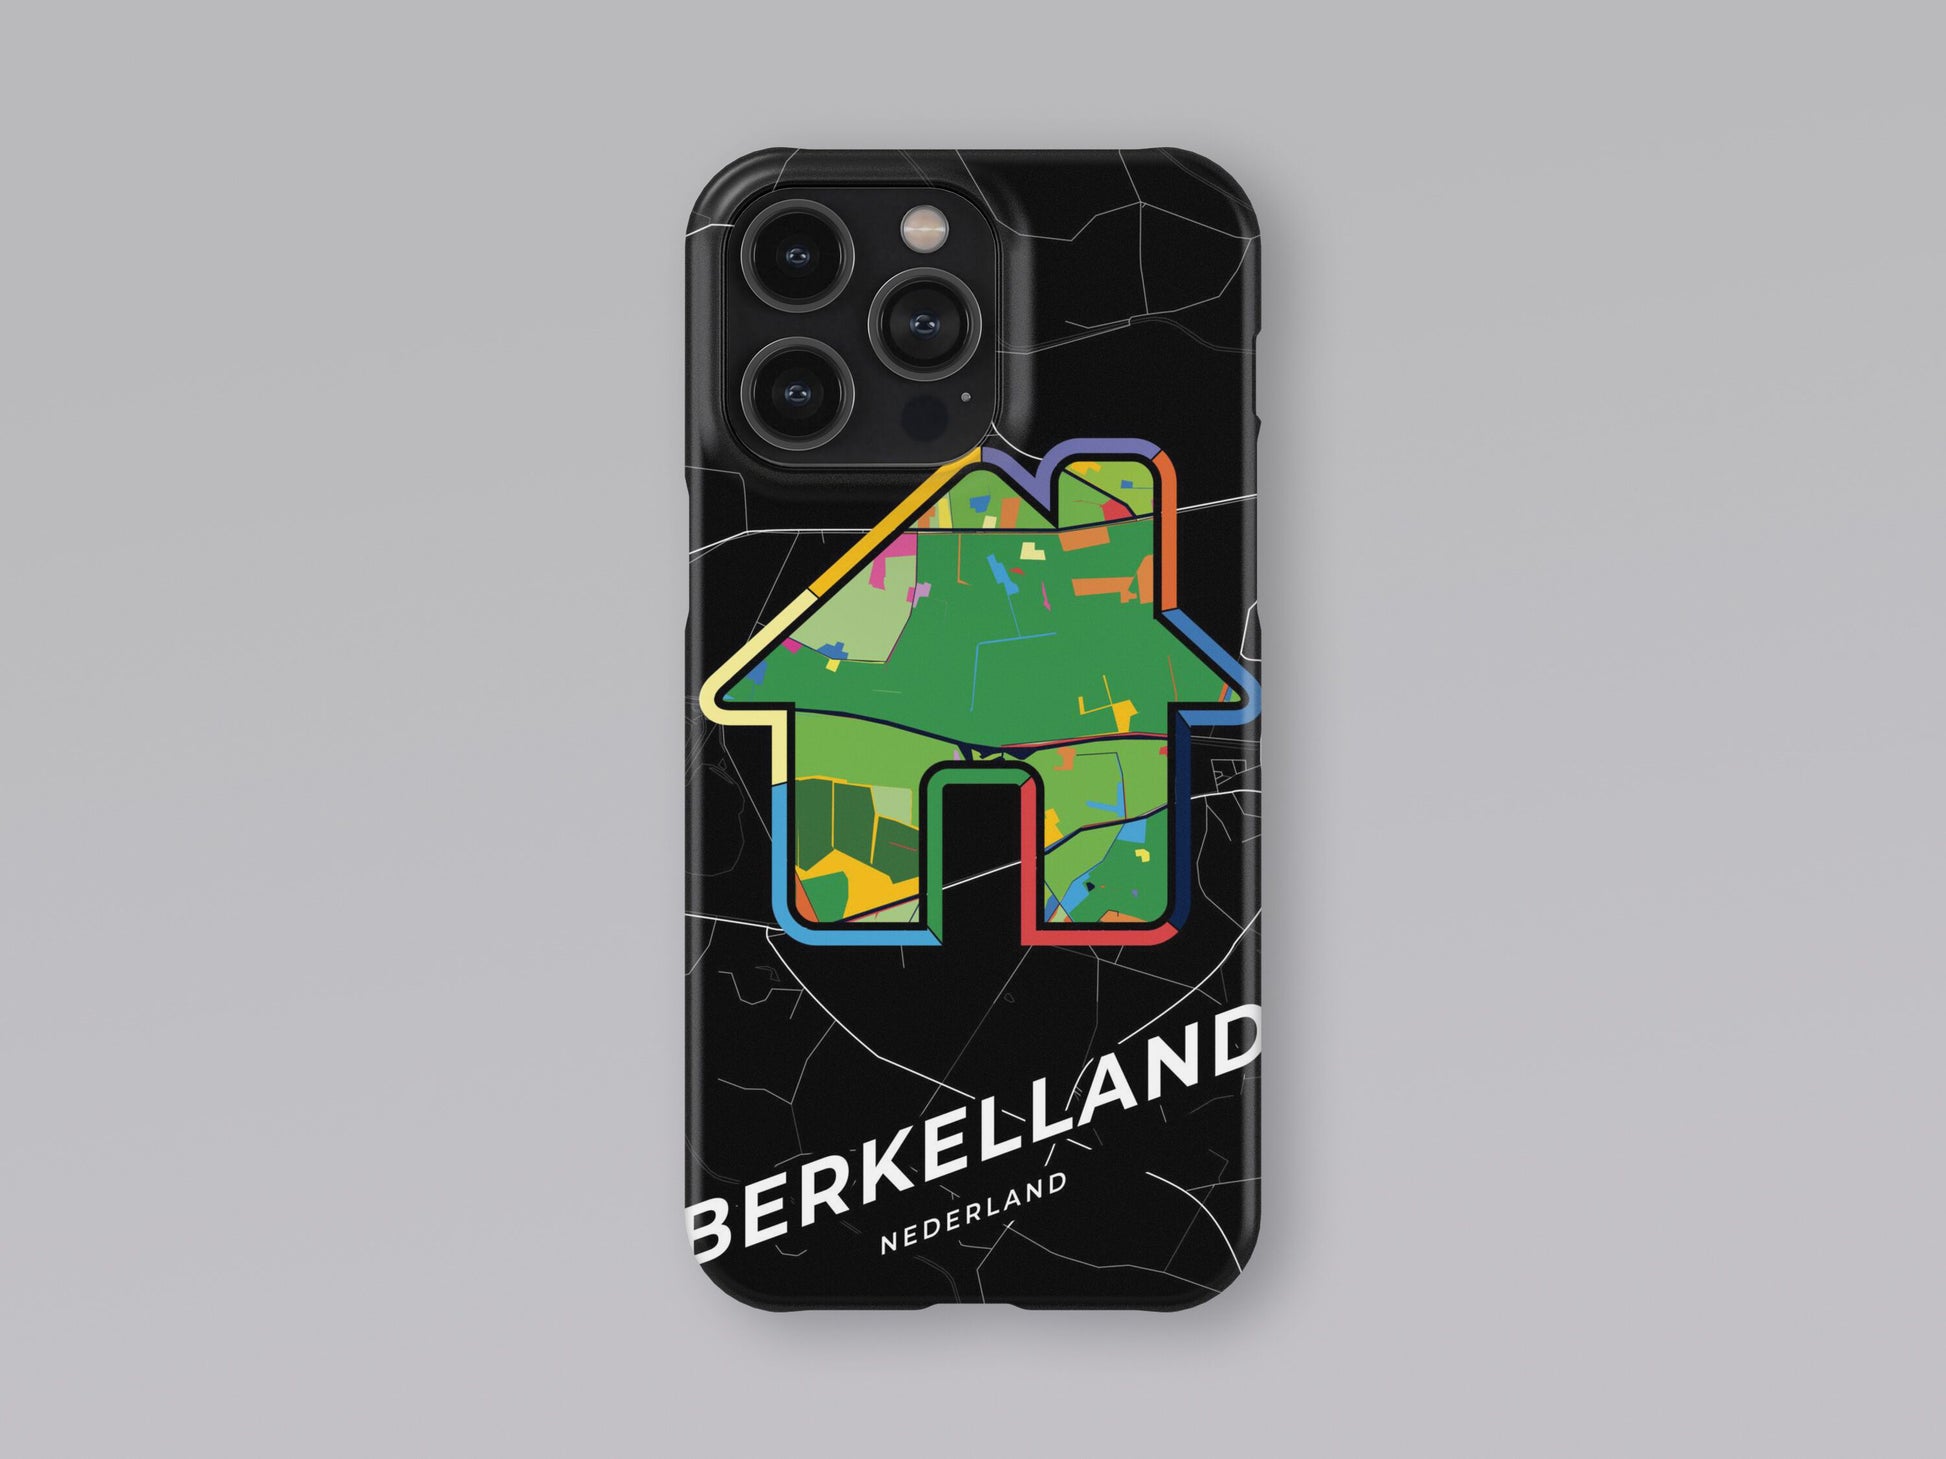 Berkelland Netherlands slim phone case with colorful icon. Birthday, wedding or housewarming gift. Couple match cases. 3